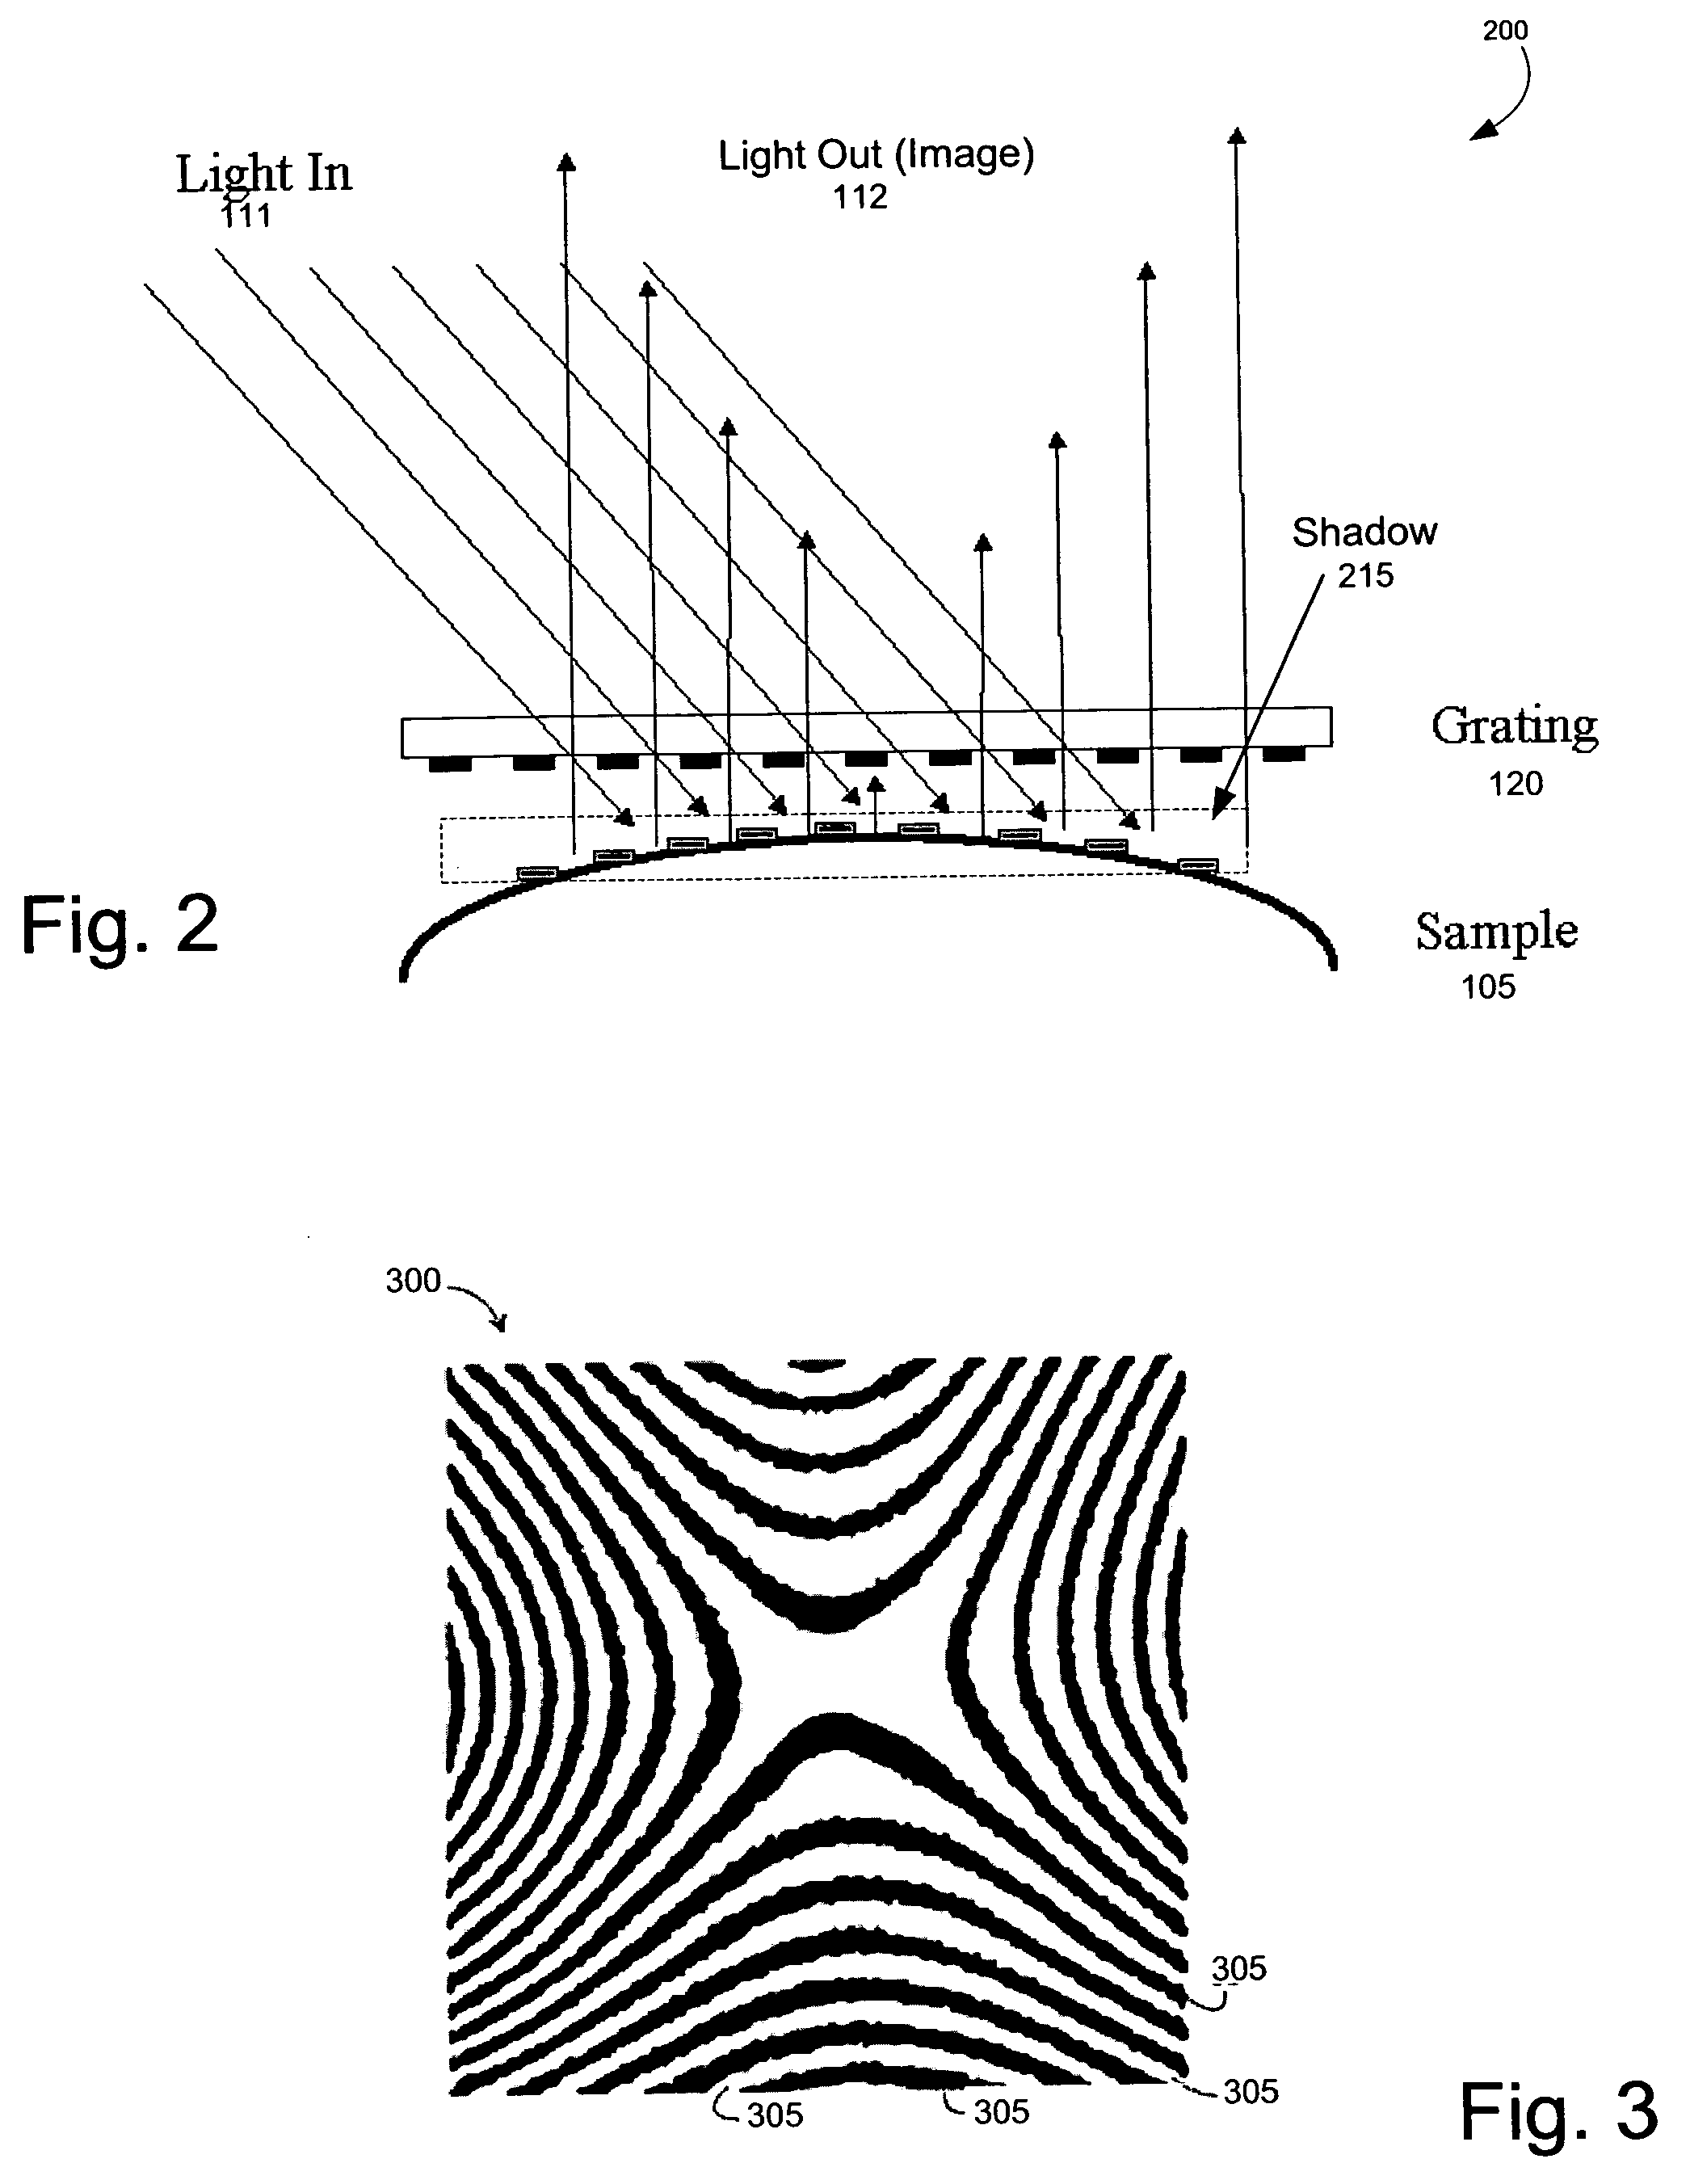 Systems and methods for measuring sample surface flatness of continuously moving samples